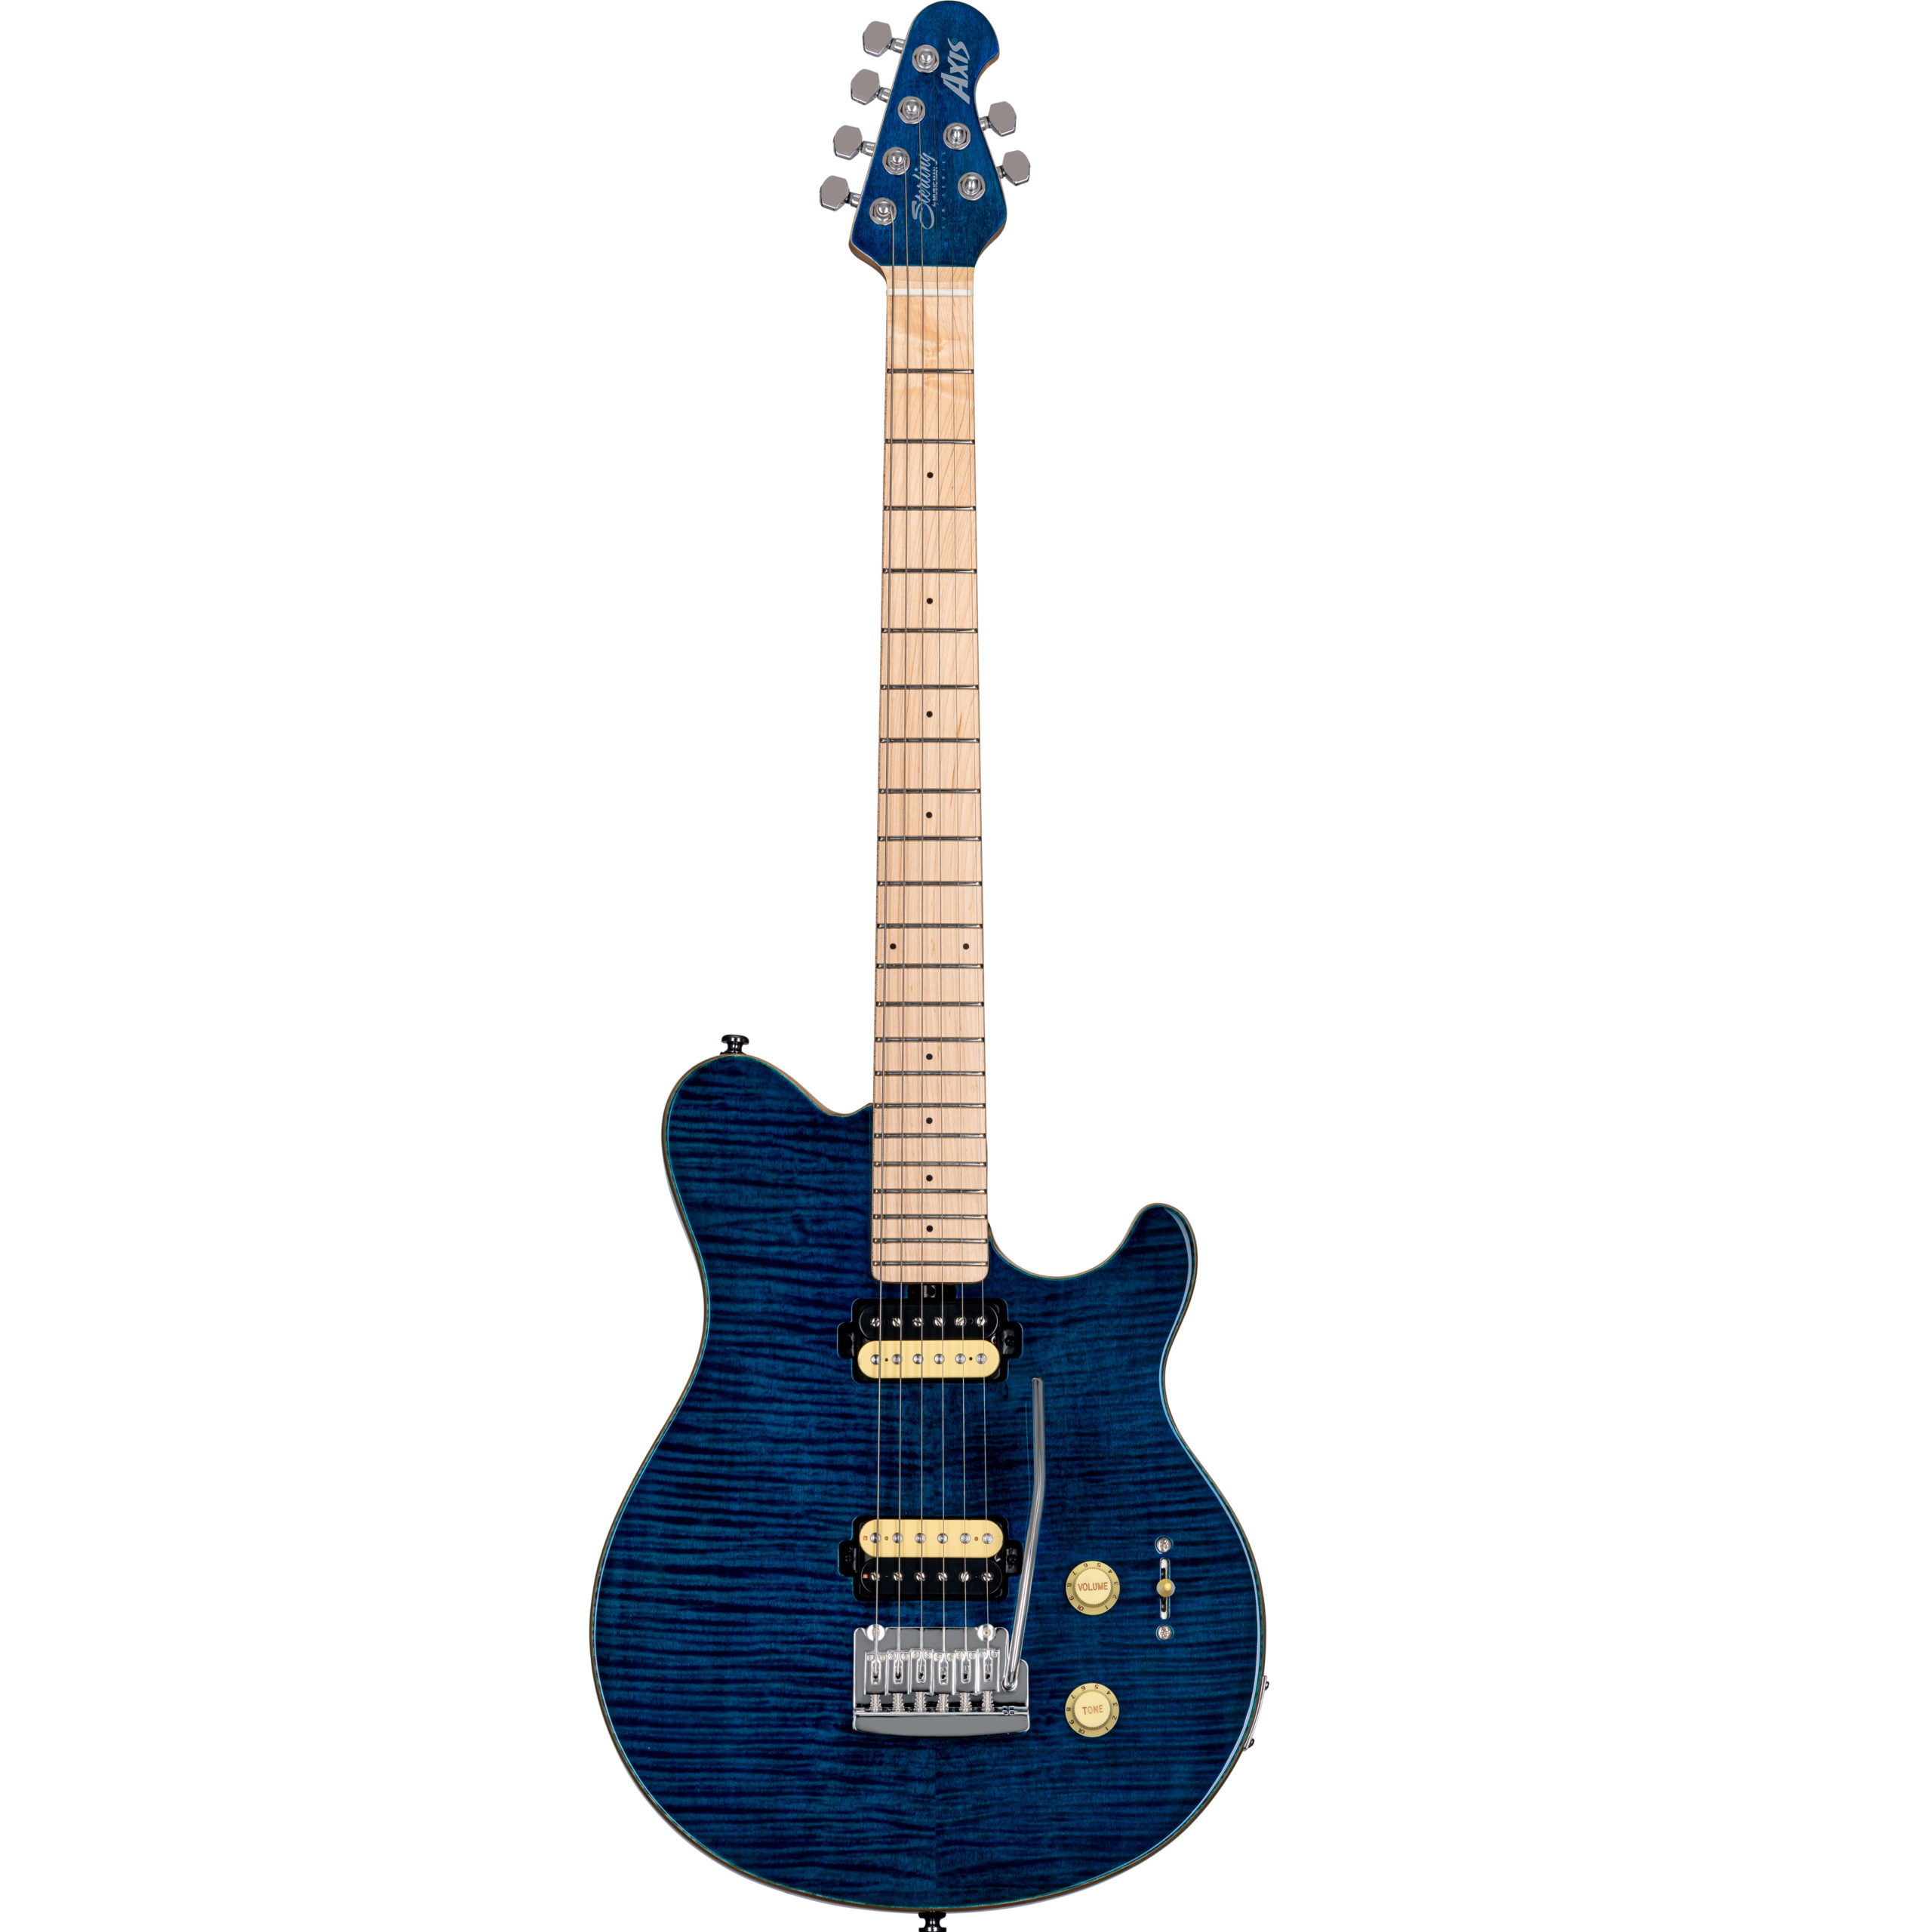 Sterling by Music Man Axis AX3 Flame Maple Guitar - Neptune Blue